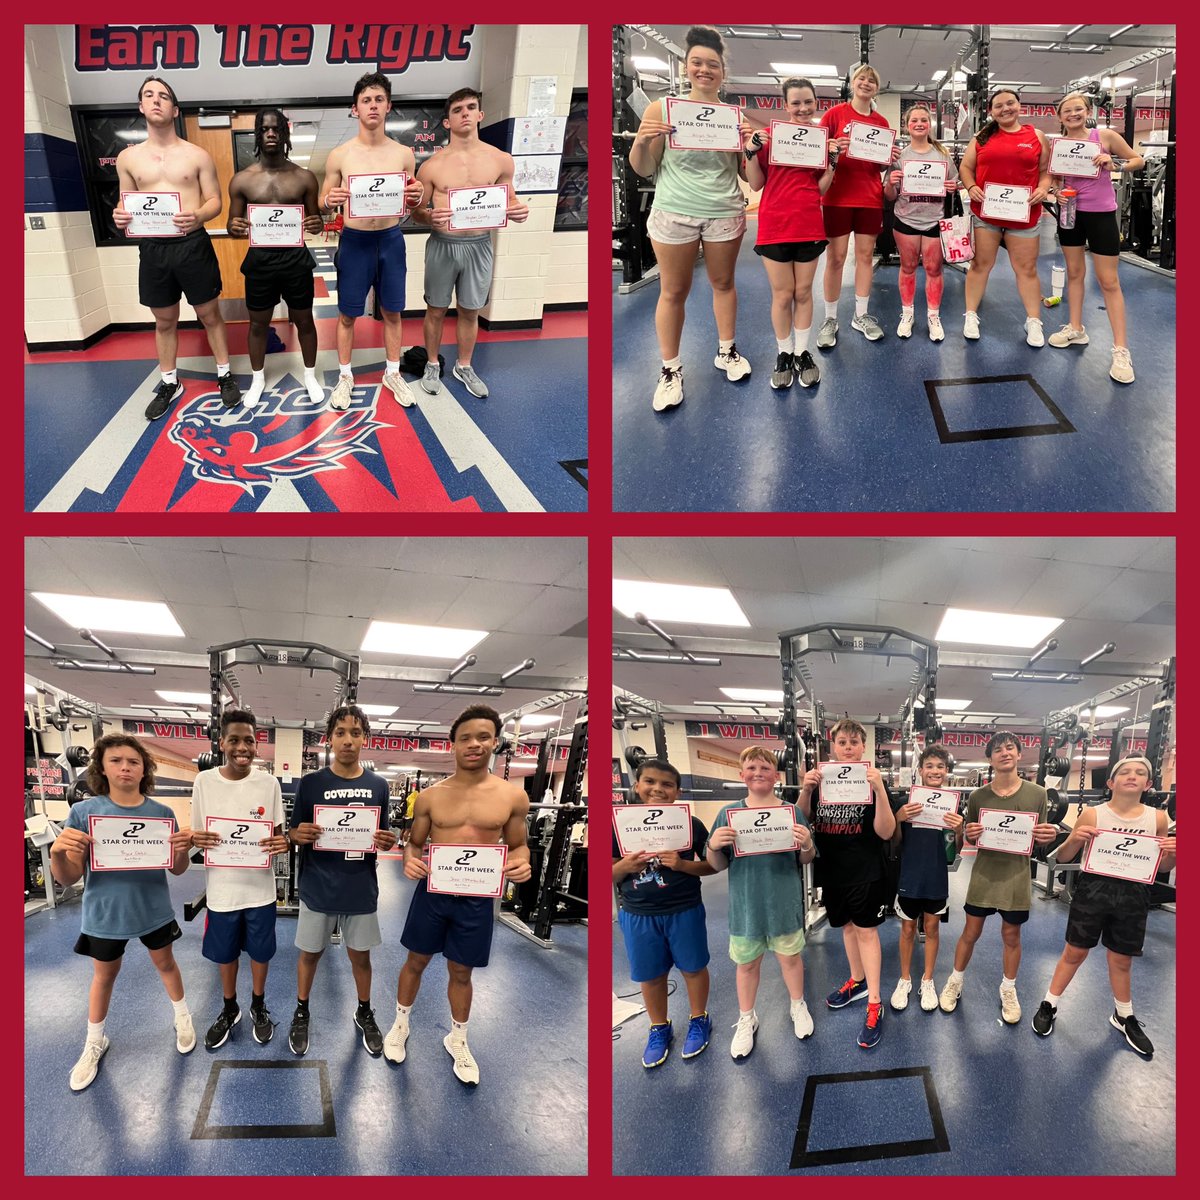 Week 2 did not disappoint. The @MBHS_Athletics Bronco’s are running wide open! Incredible week from the 600+ who continue to bring great energy. Rest up Broncos. We level up week 3 😤. Let’s give a big shoutout to your PC 🌟s of the week. #Everyday #PCtrained